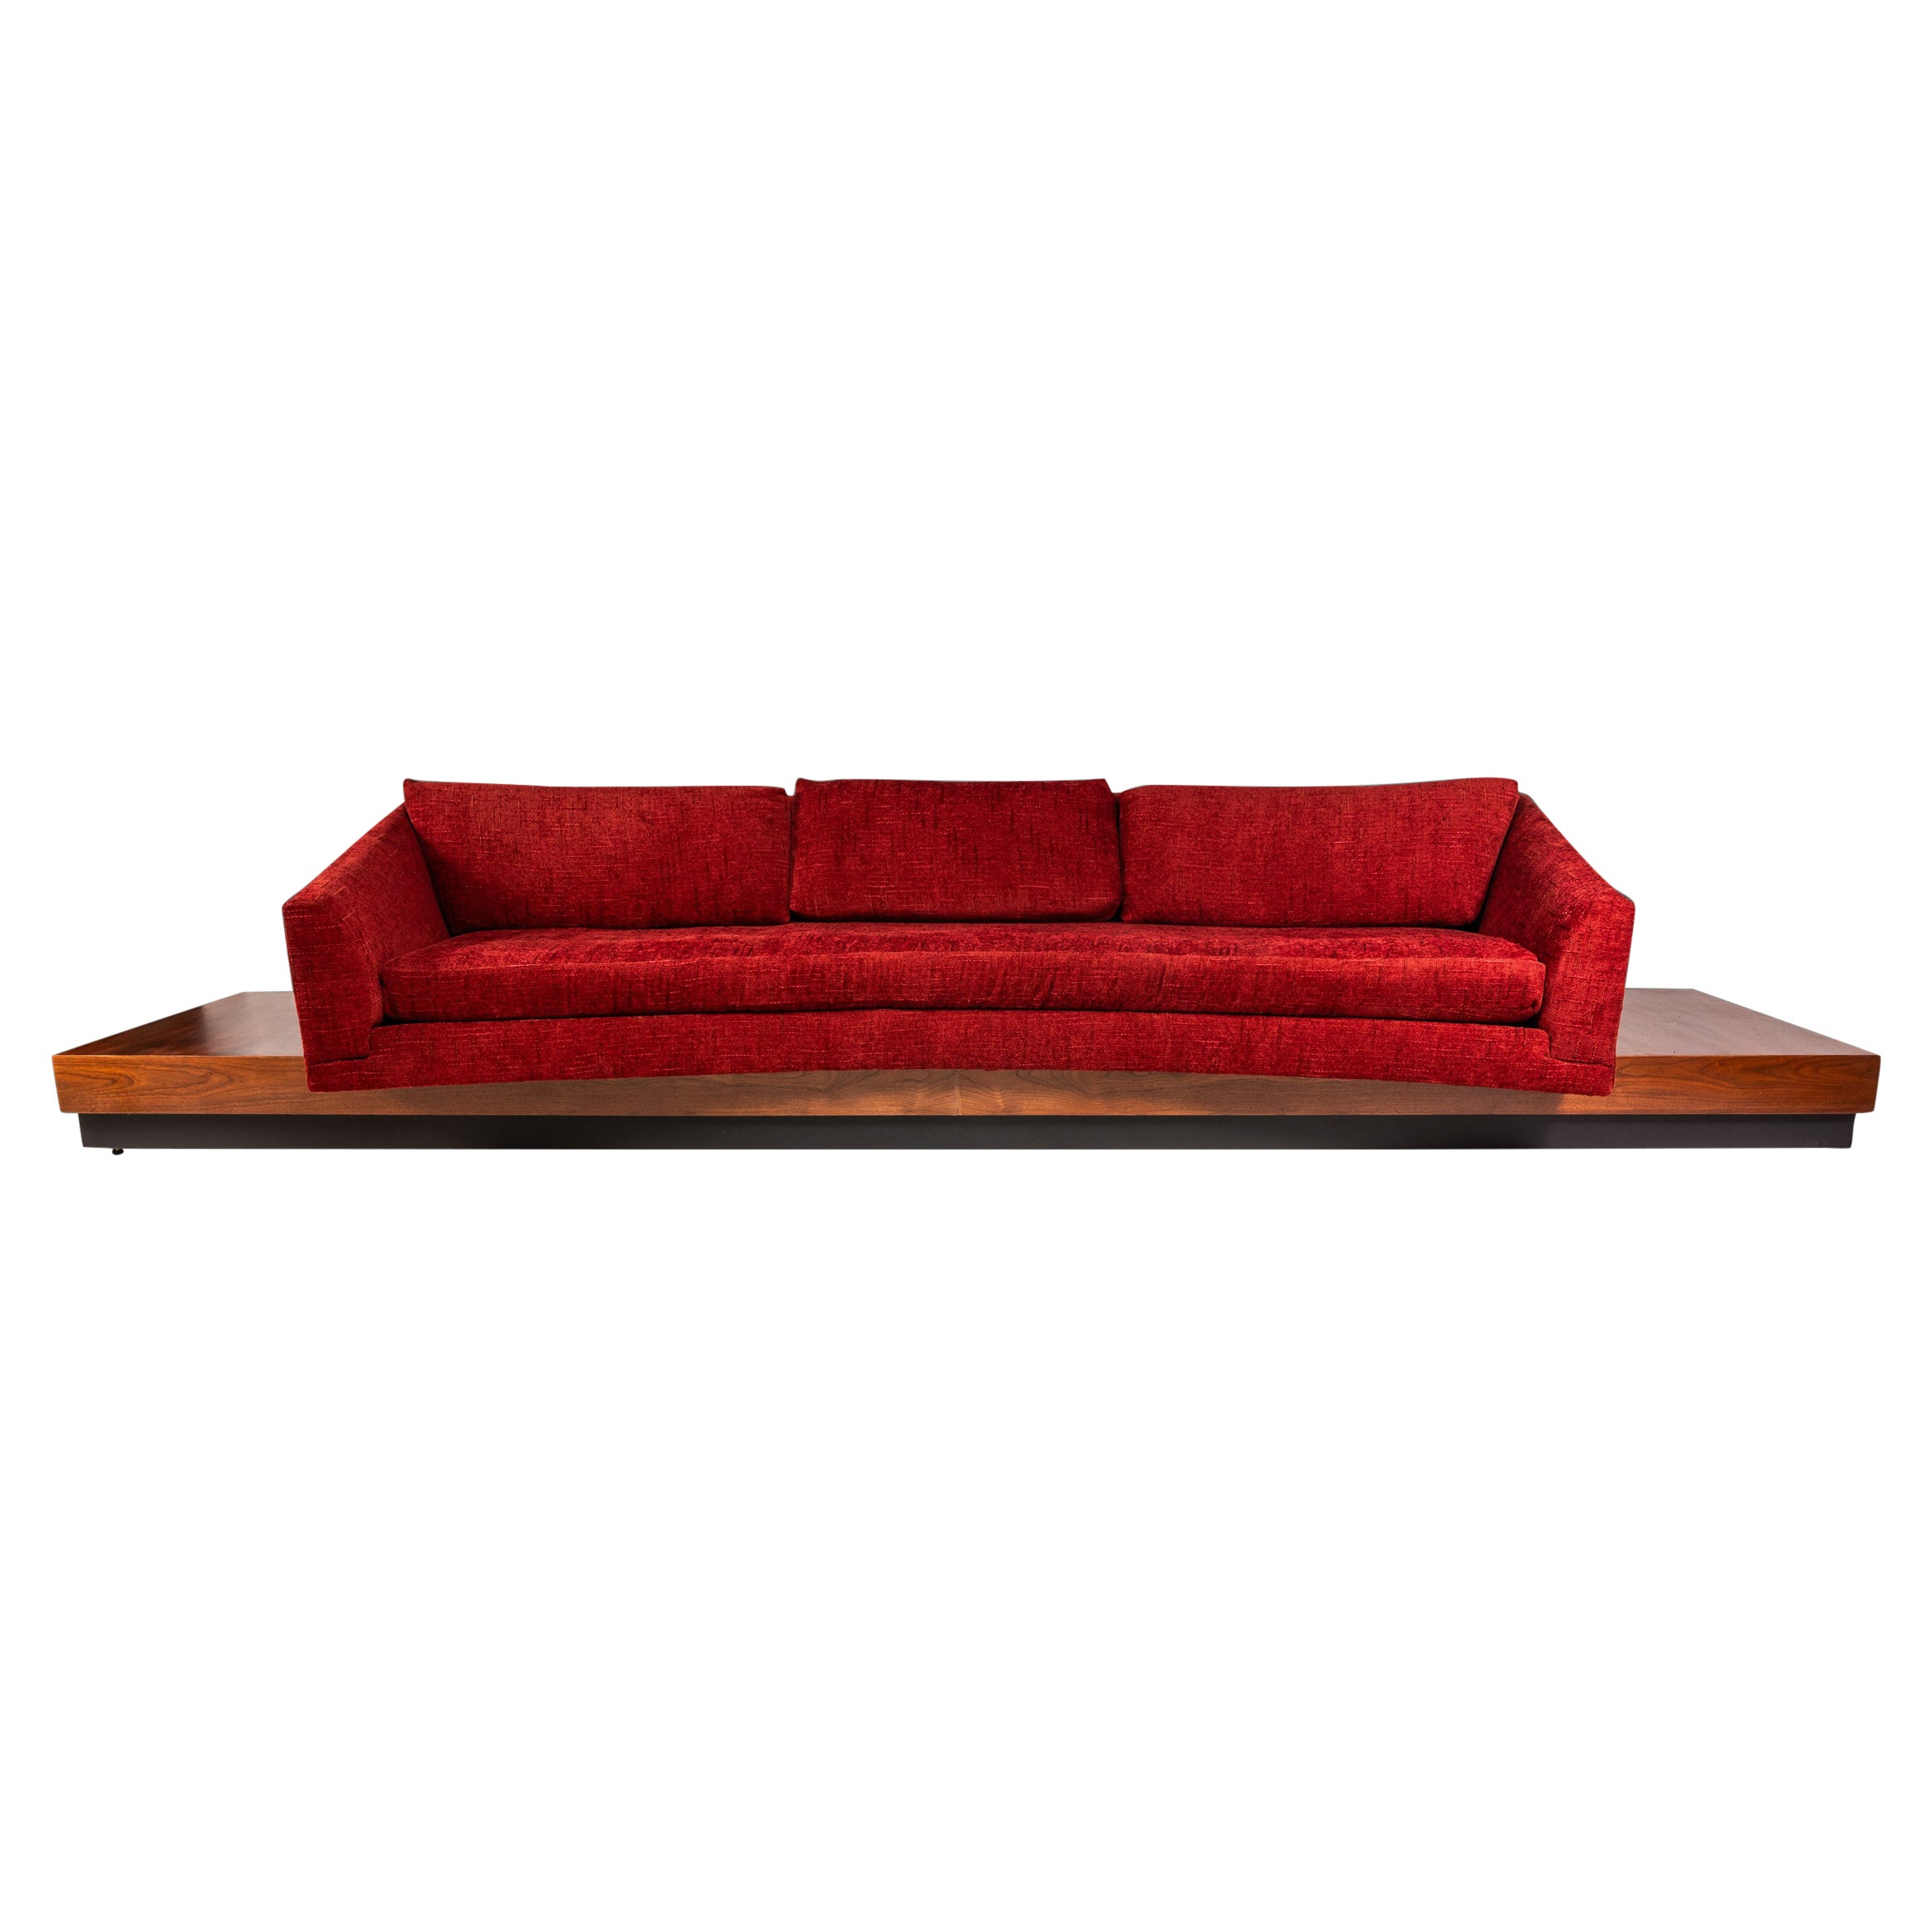 Expansive 12-Foot Platform Sofa by Adrian Pearsall for Craft Associates, 1960s For Sale